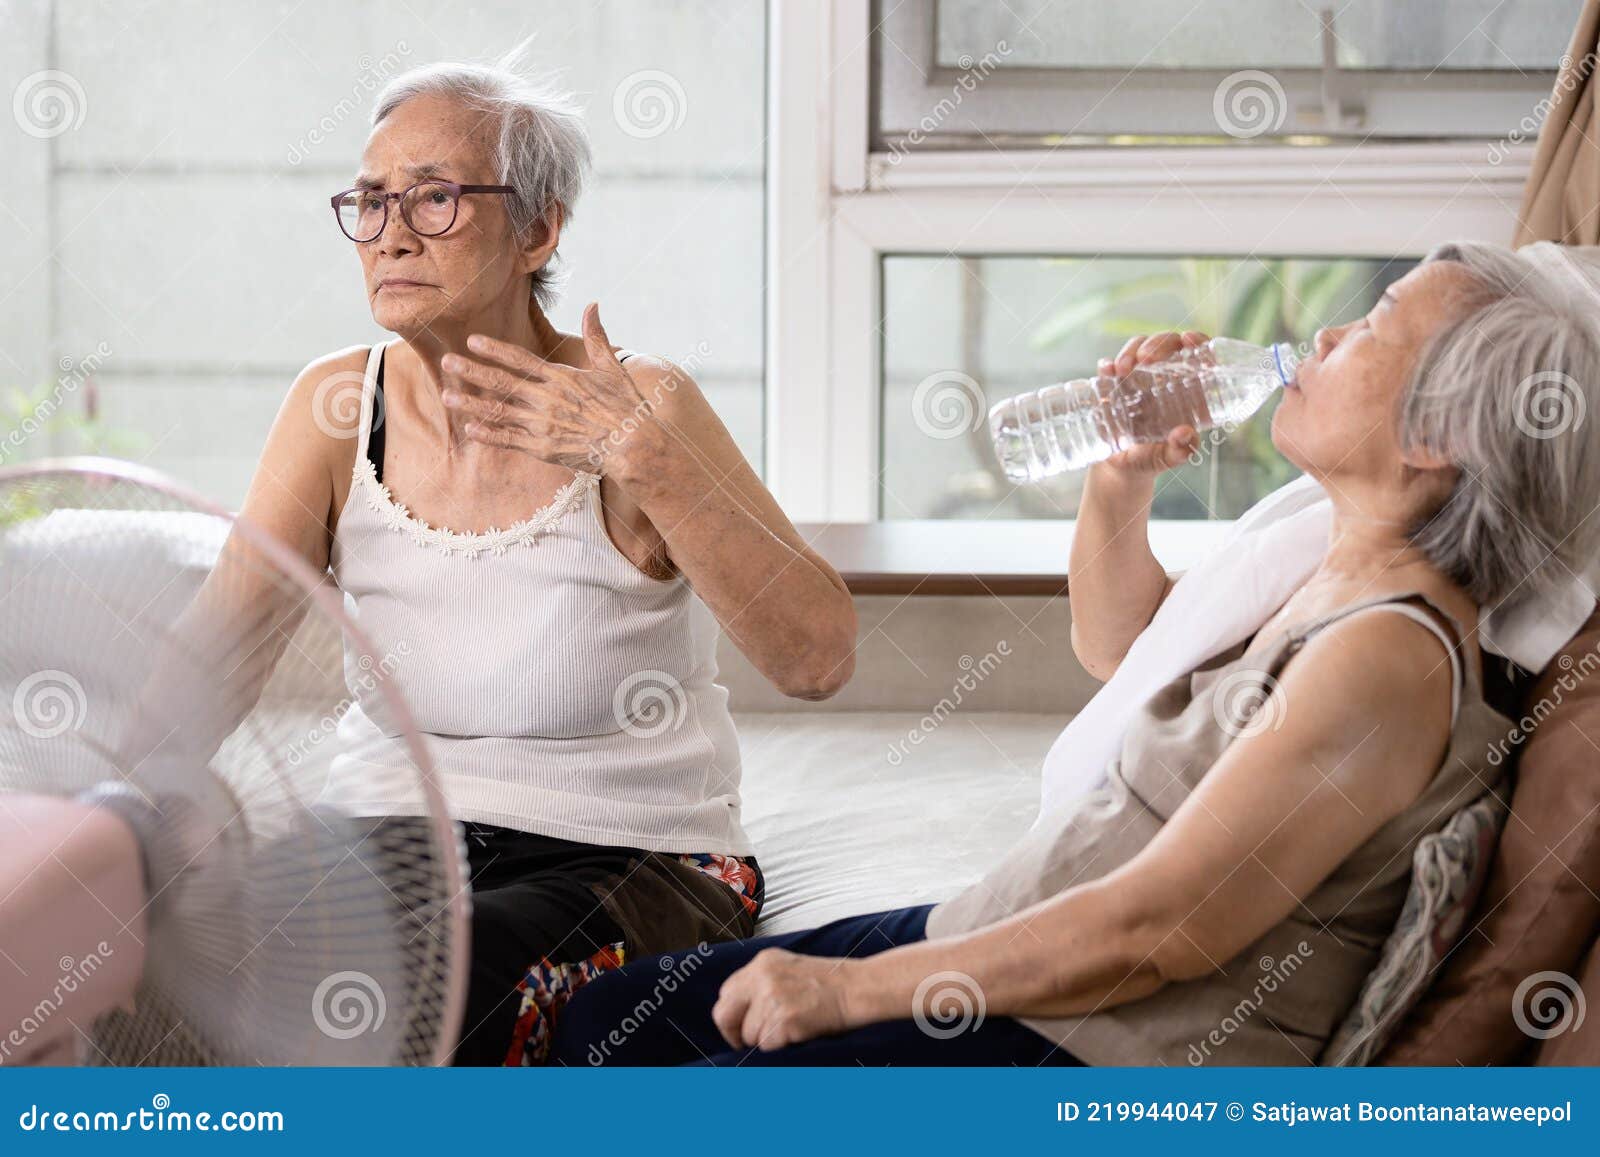 asian elderly people who are hot and thirsty from high temperature heat waves,drinking water help to reduce body heat,prevent heat